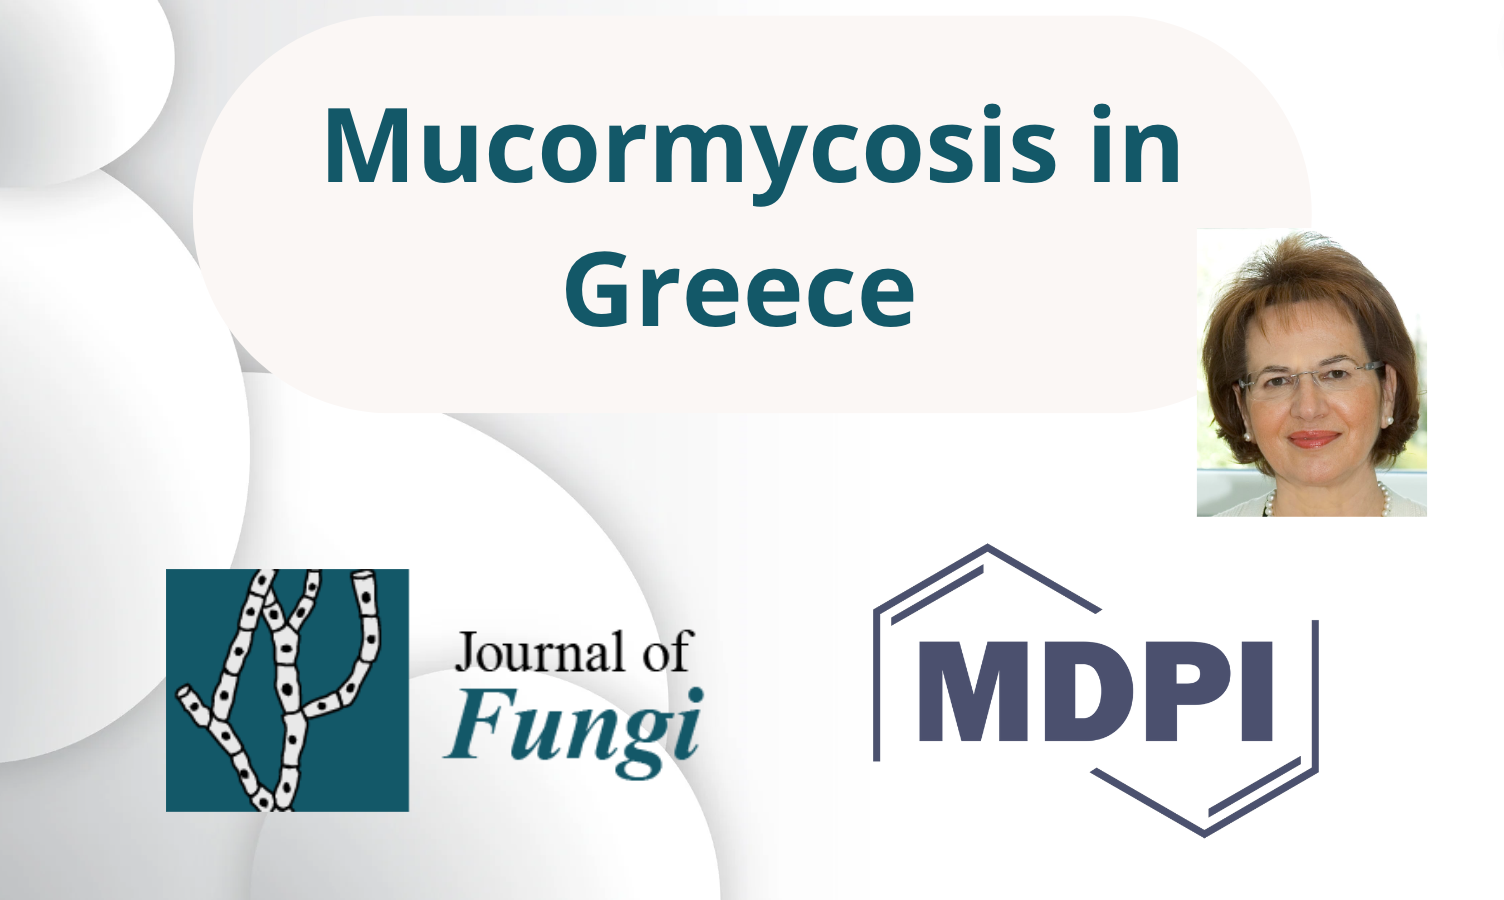 Mucormycosis in Greece